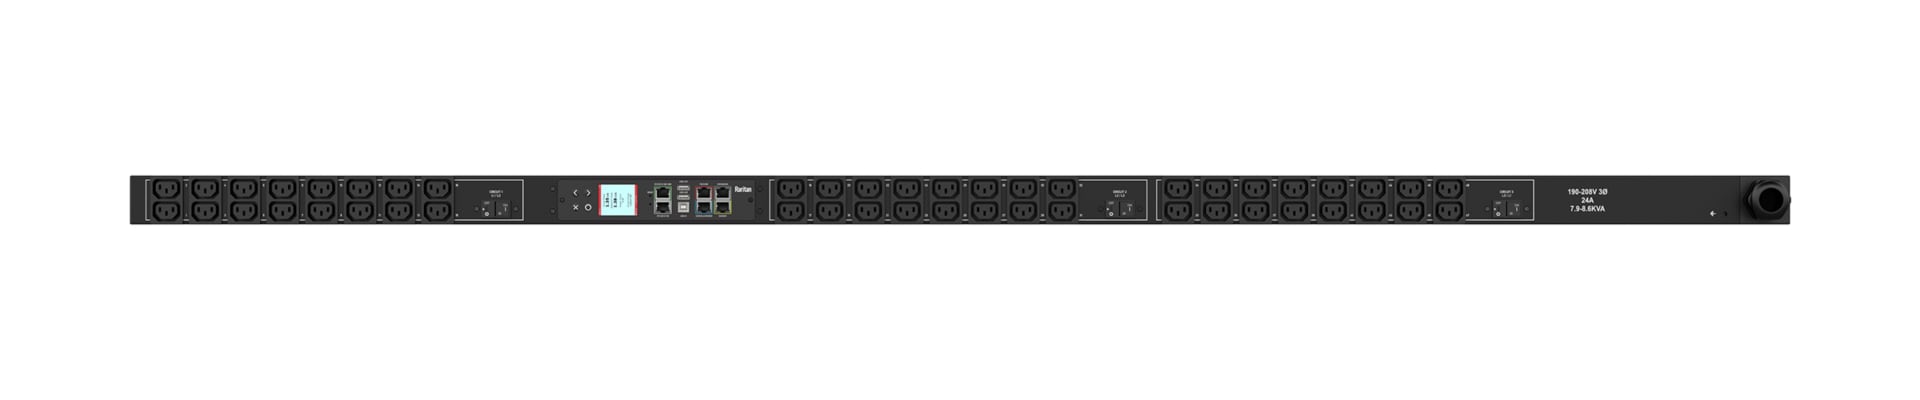 Raritan 3-Phase 208V 24A Rack Power Distribution Unit with 45 Outlet